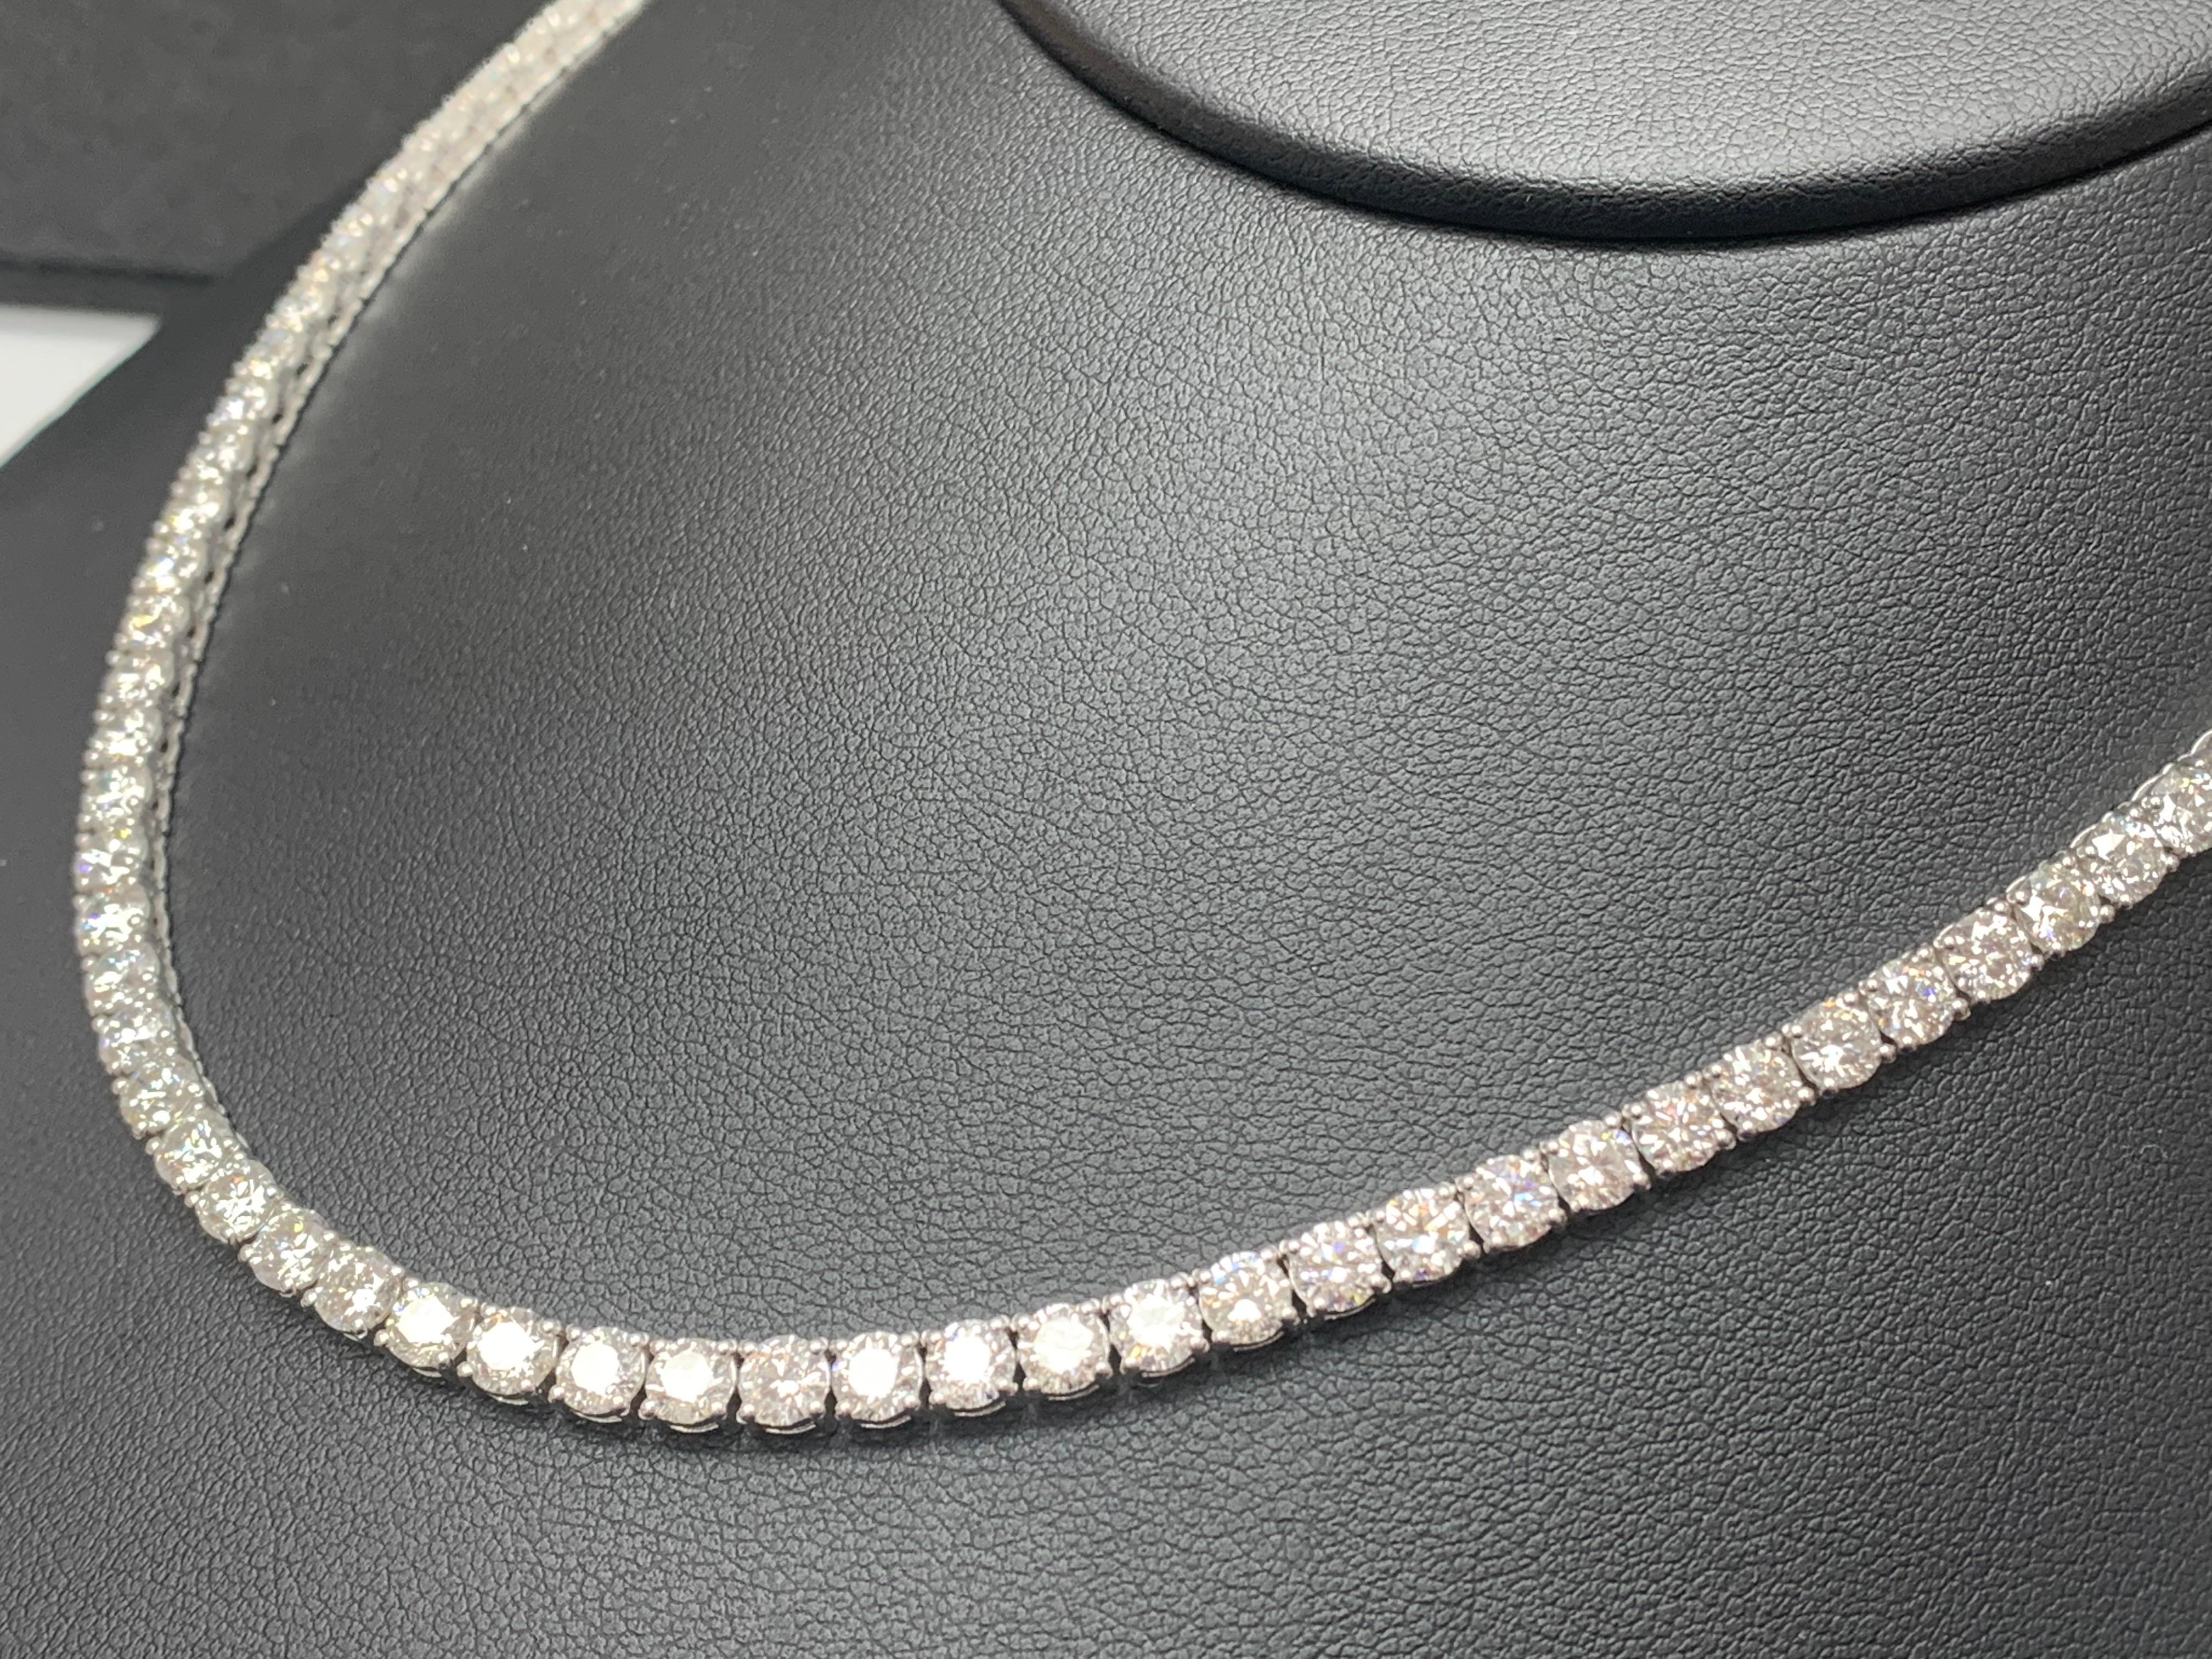 25.03 Carat Diamond Tennis Necklace in 14K White Gold For Sale 2